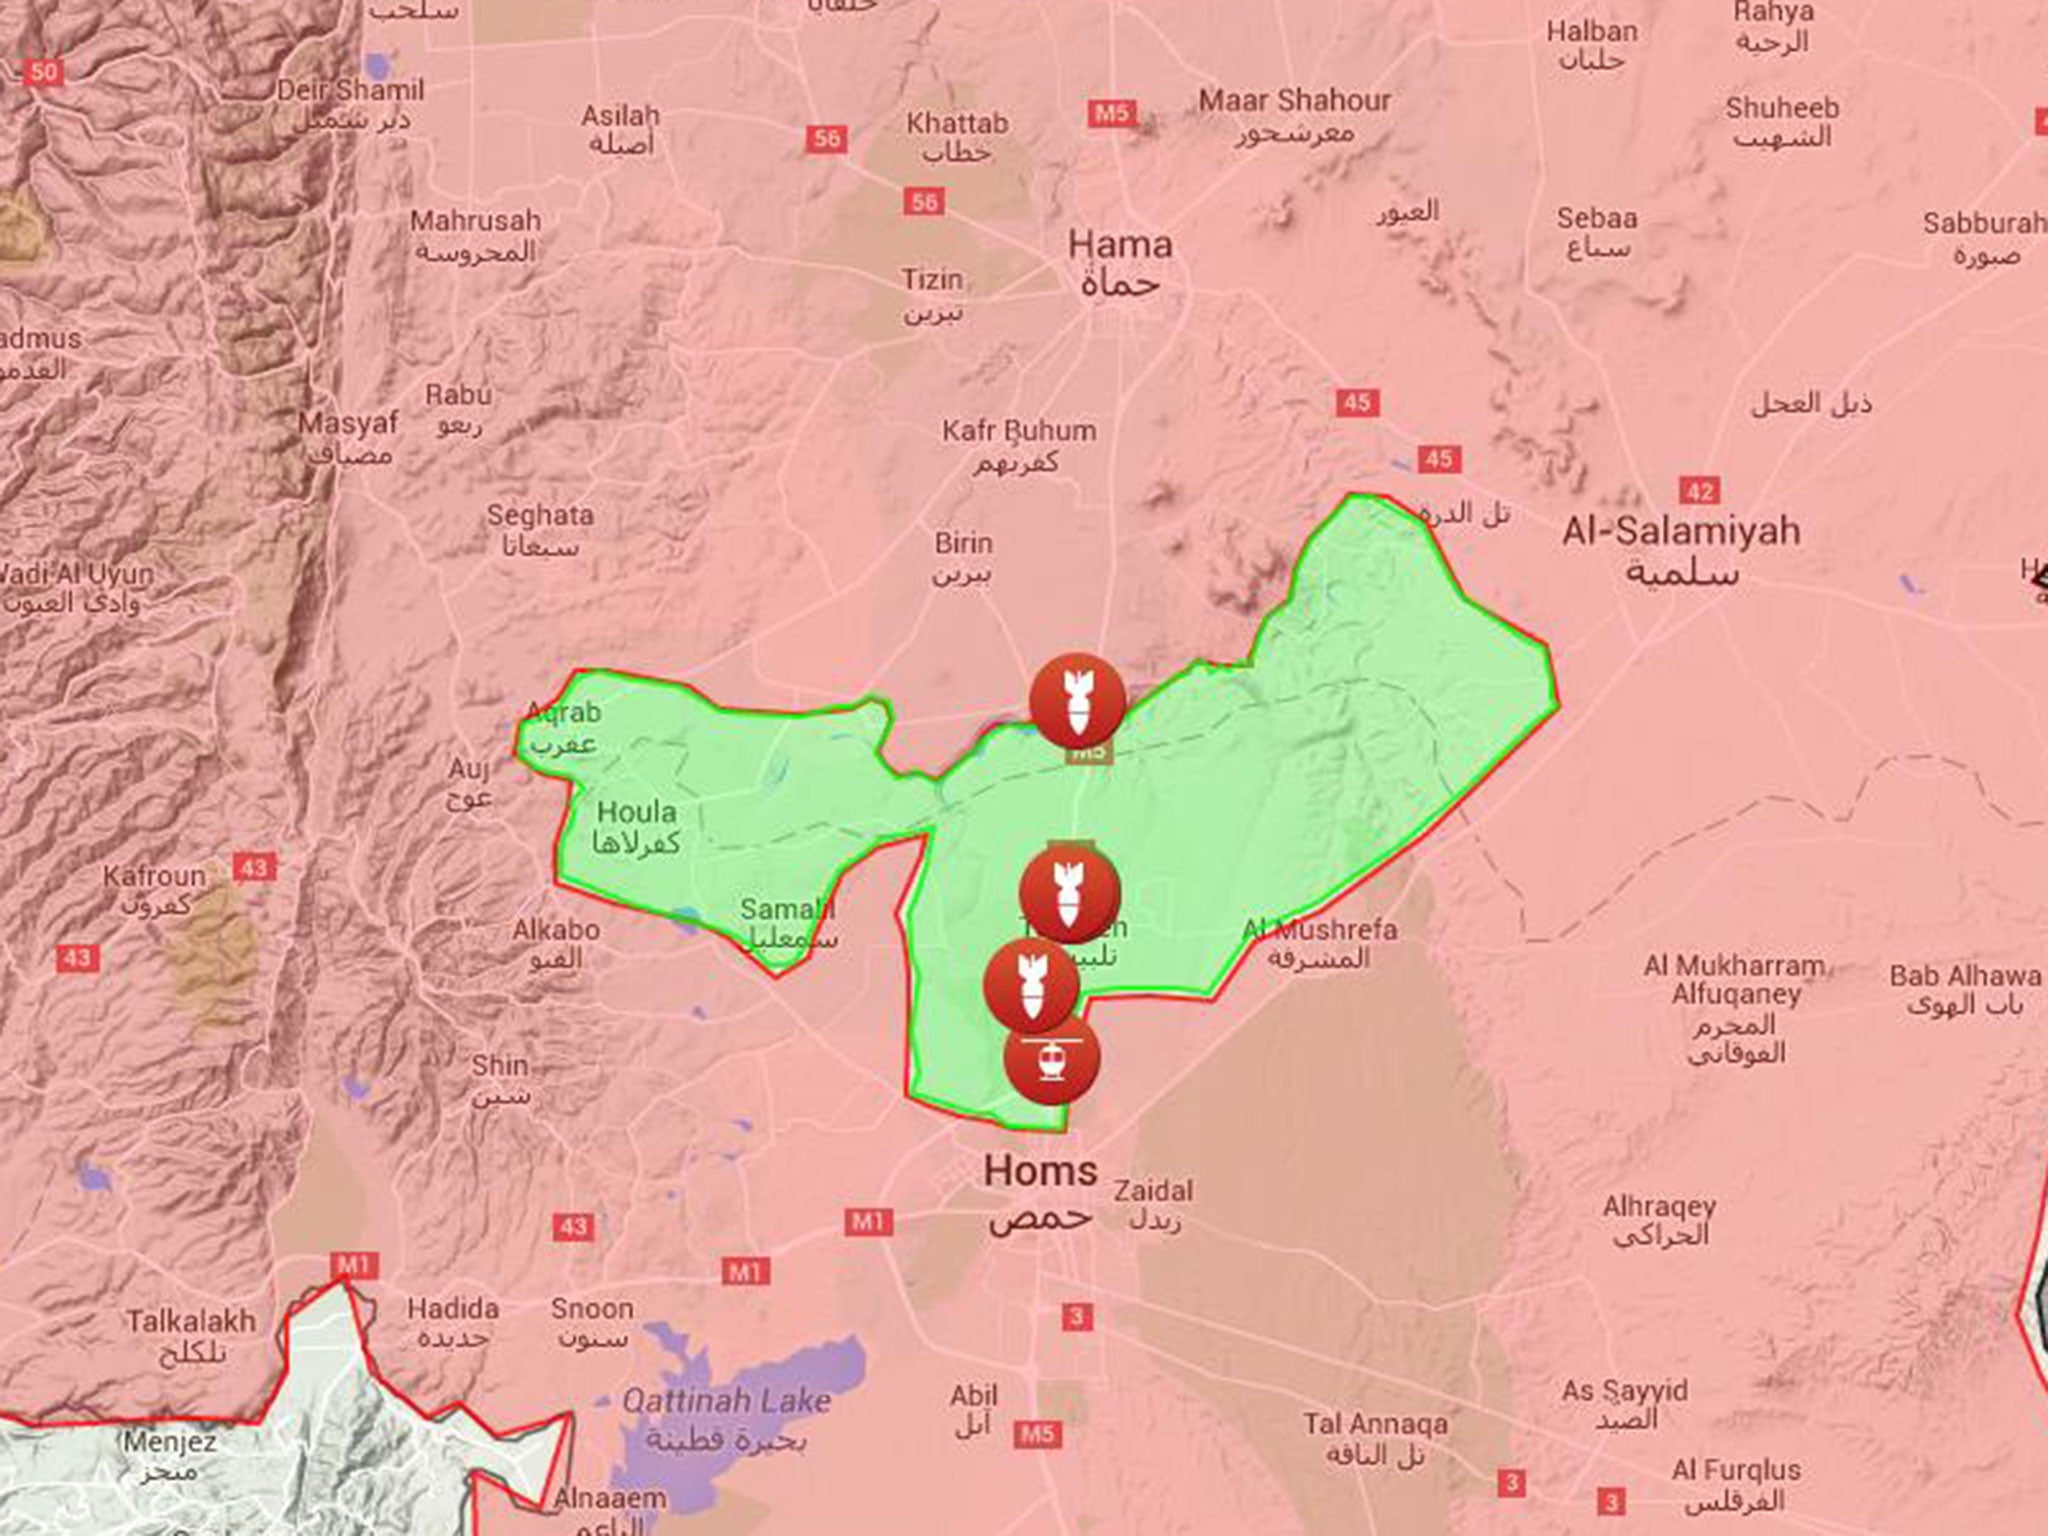 The helicopter icon shows the reported location of the Russian helicopter crash. Rebel-held territory is shown in green and regime areas in red.